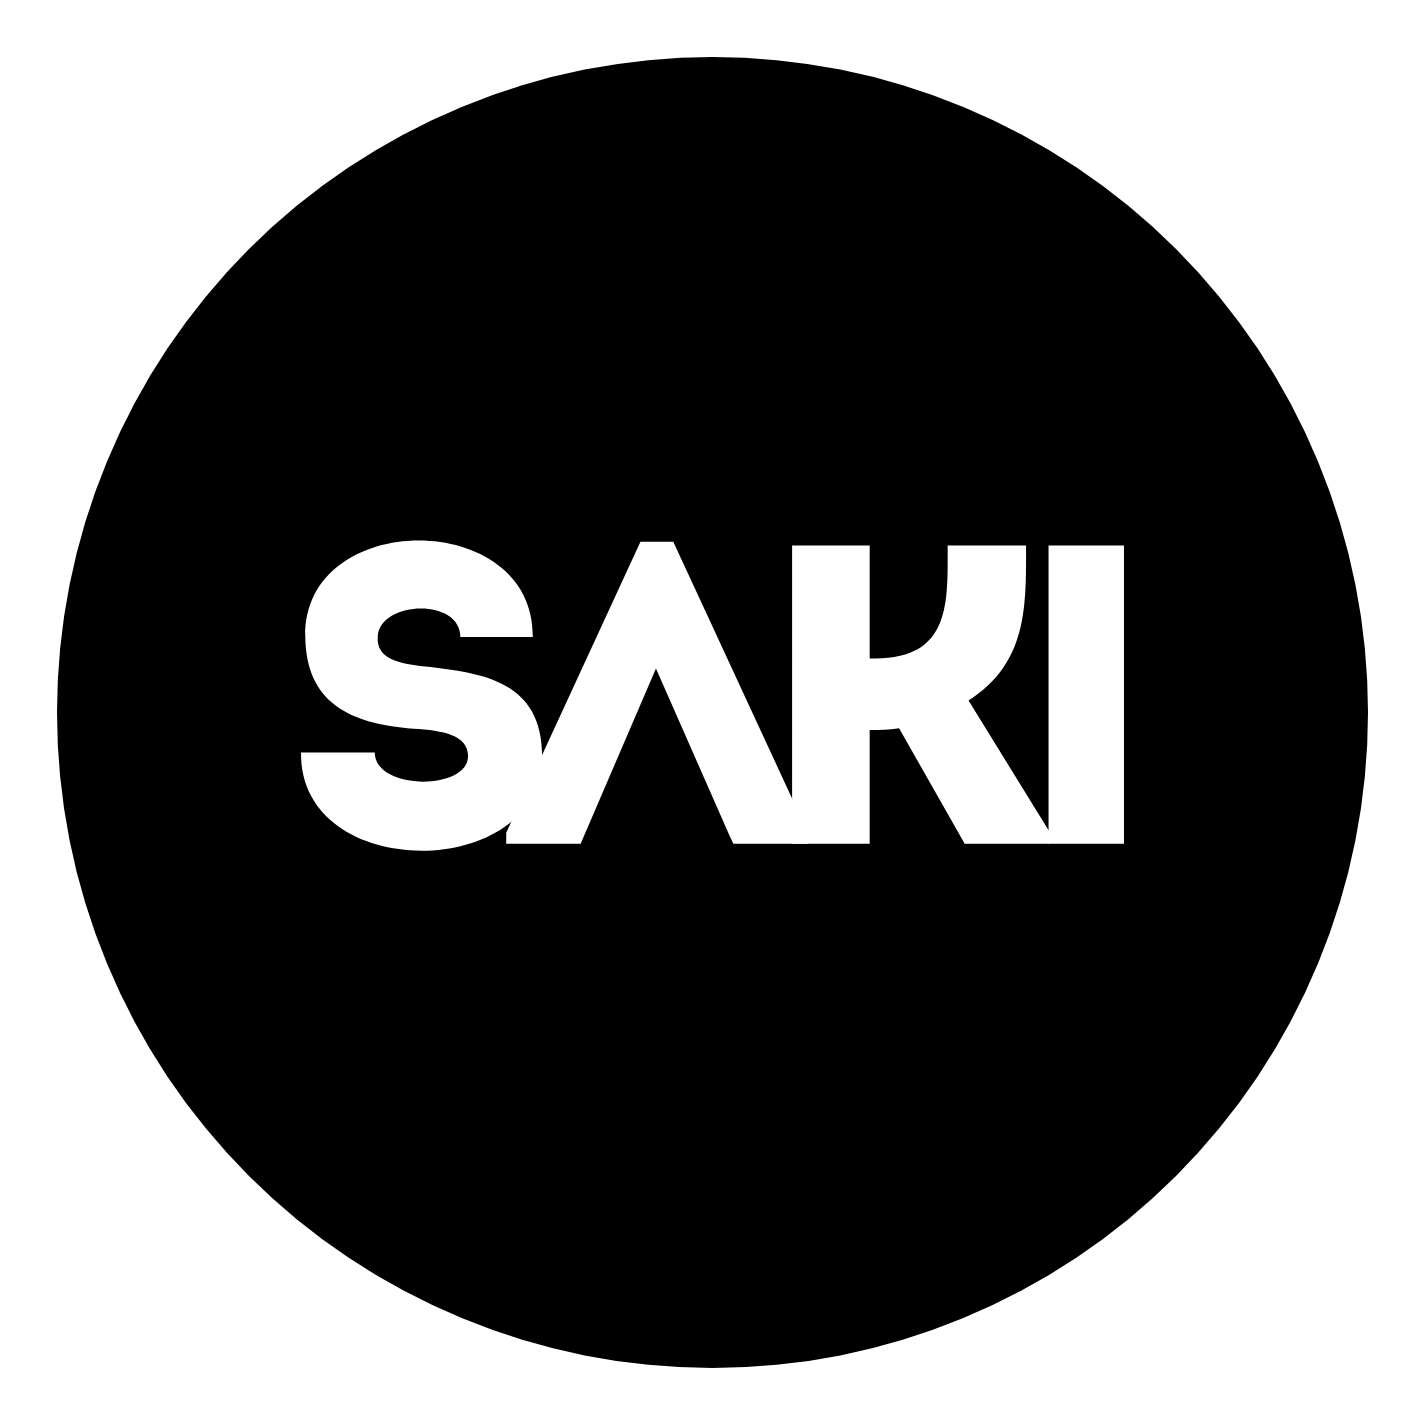 Saki Is An Automatic Pot Stirrer That Does the Hard Work for You